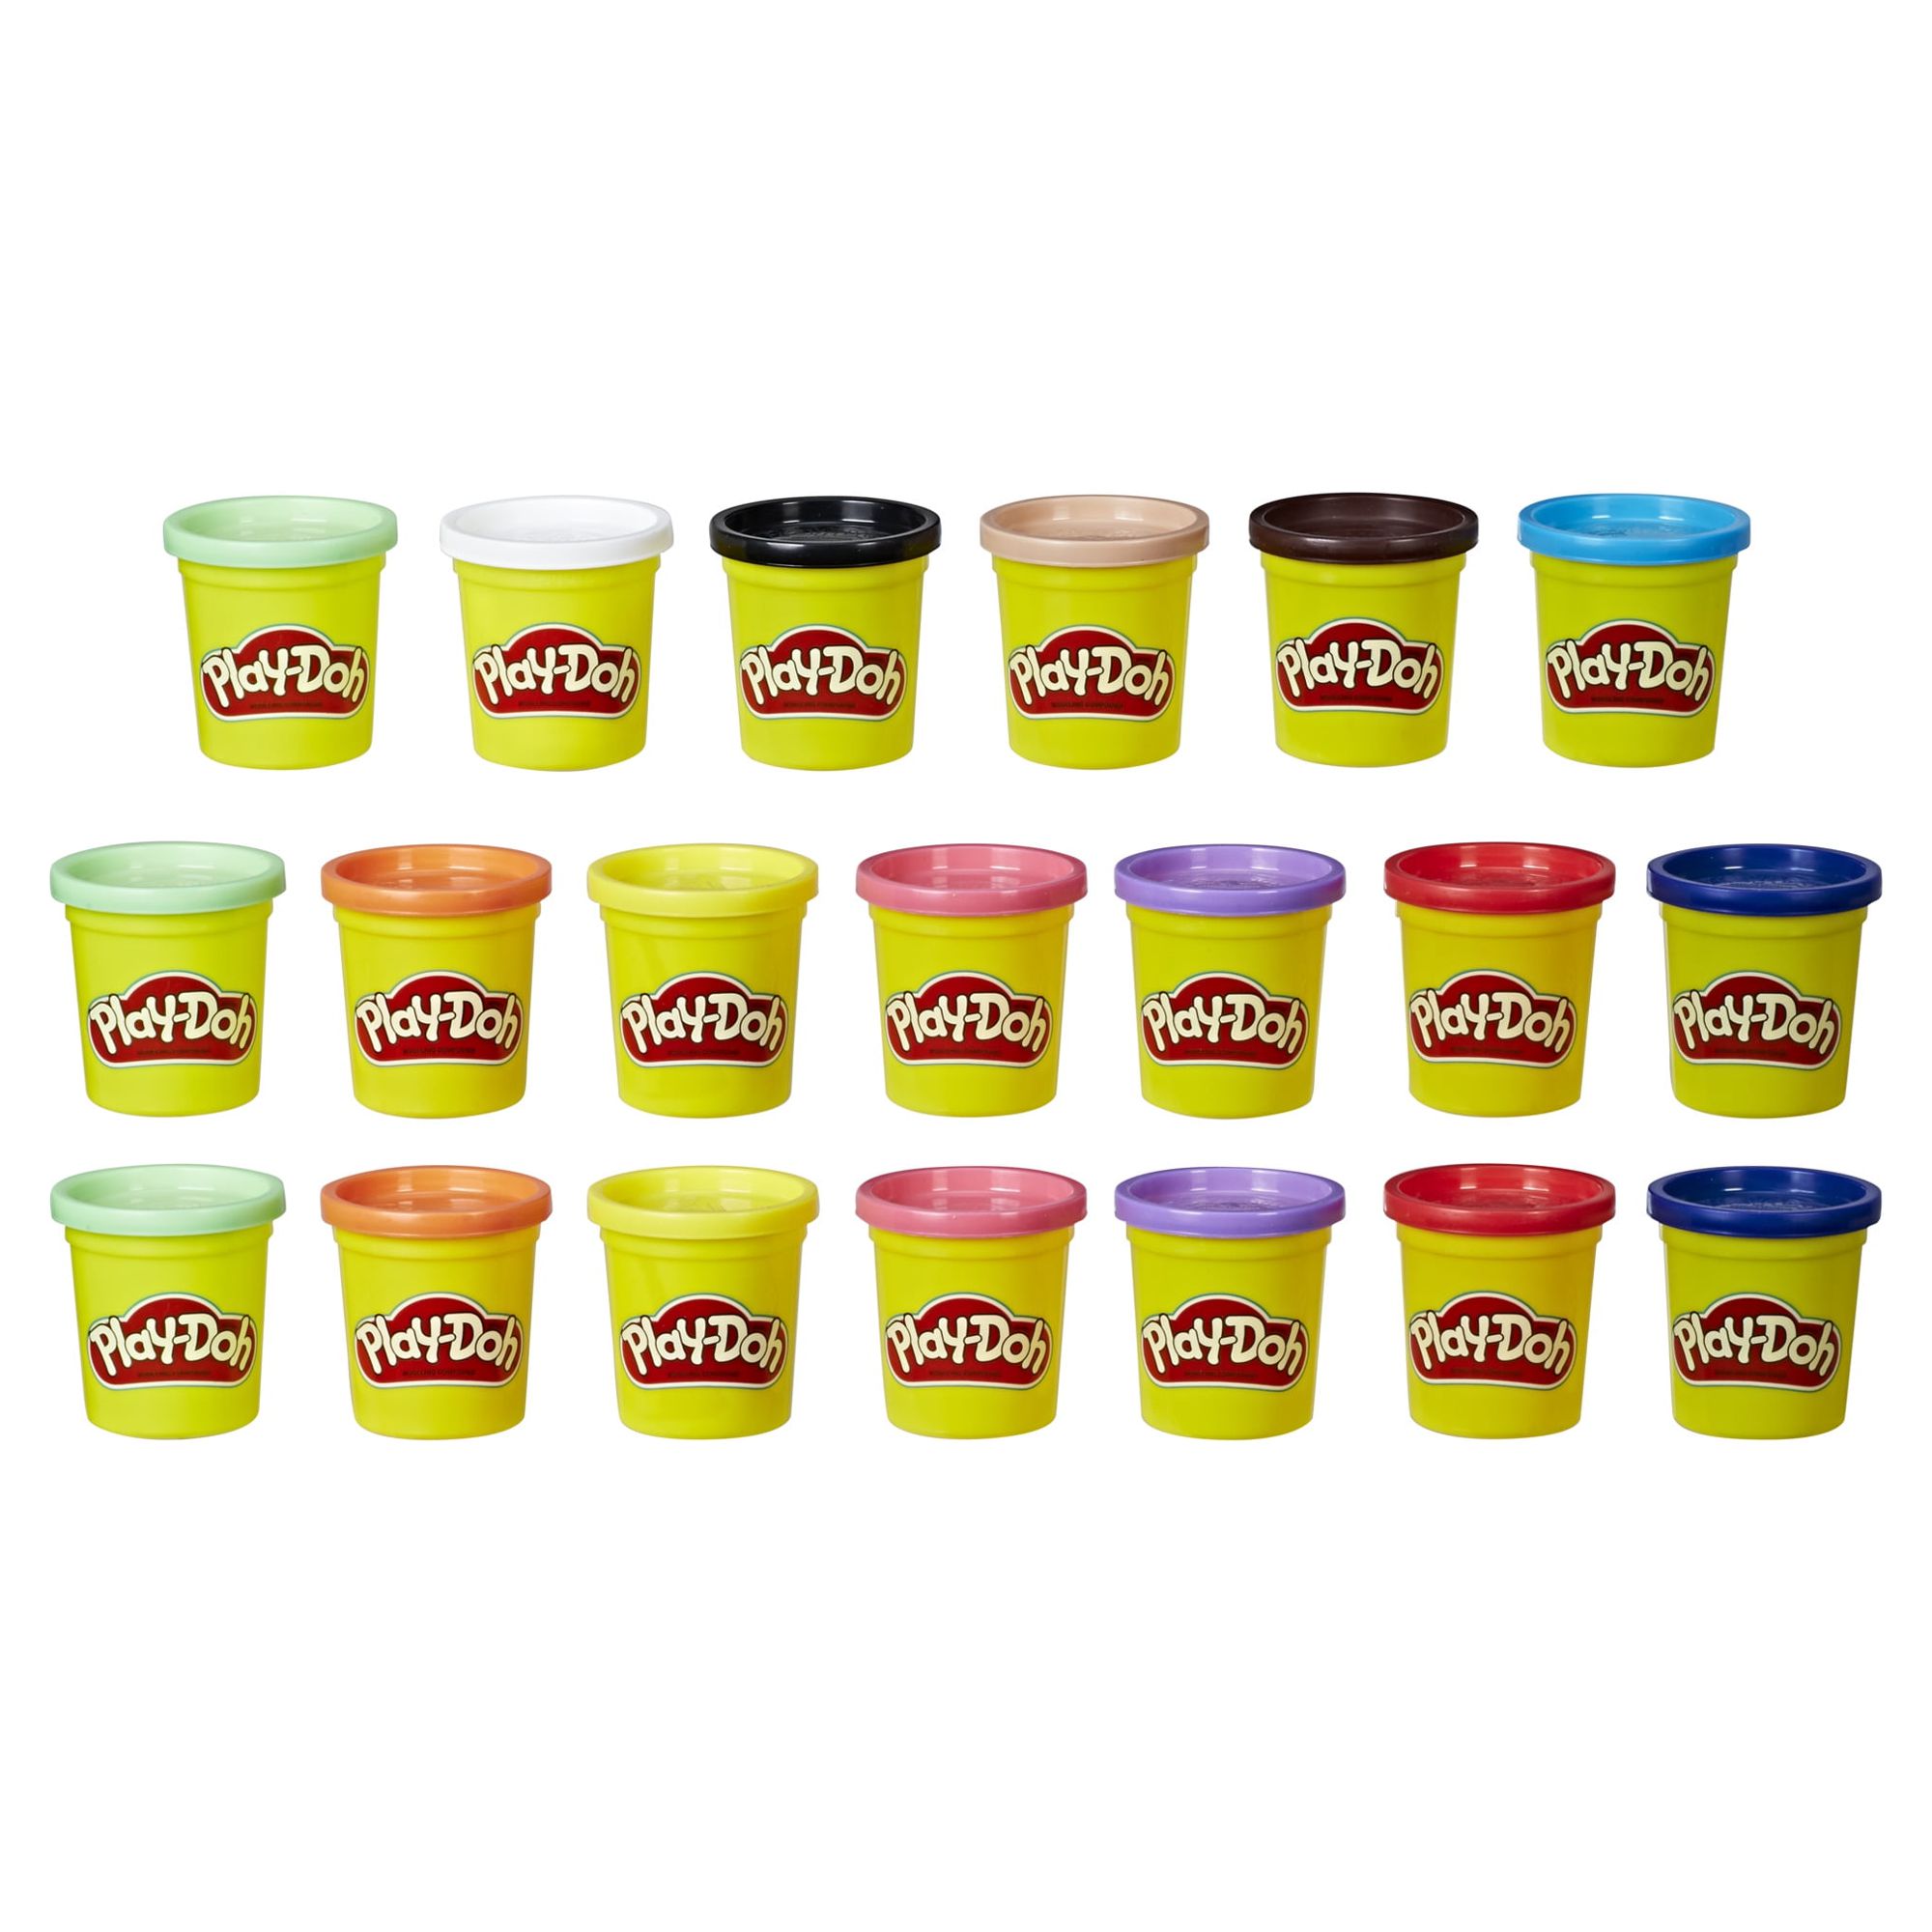 Play-Doh Super Color 20-Pack of 3-Ounce Cans, Kids Toys, Arts and Crafts for Kids - image 3 of 4